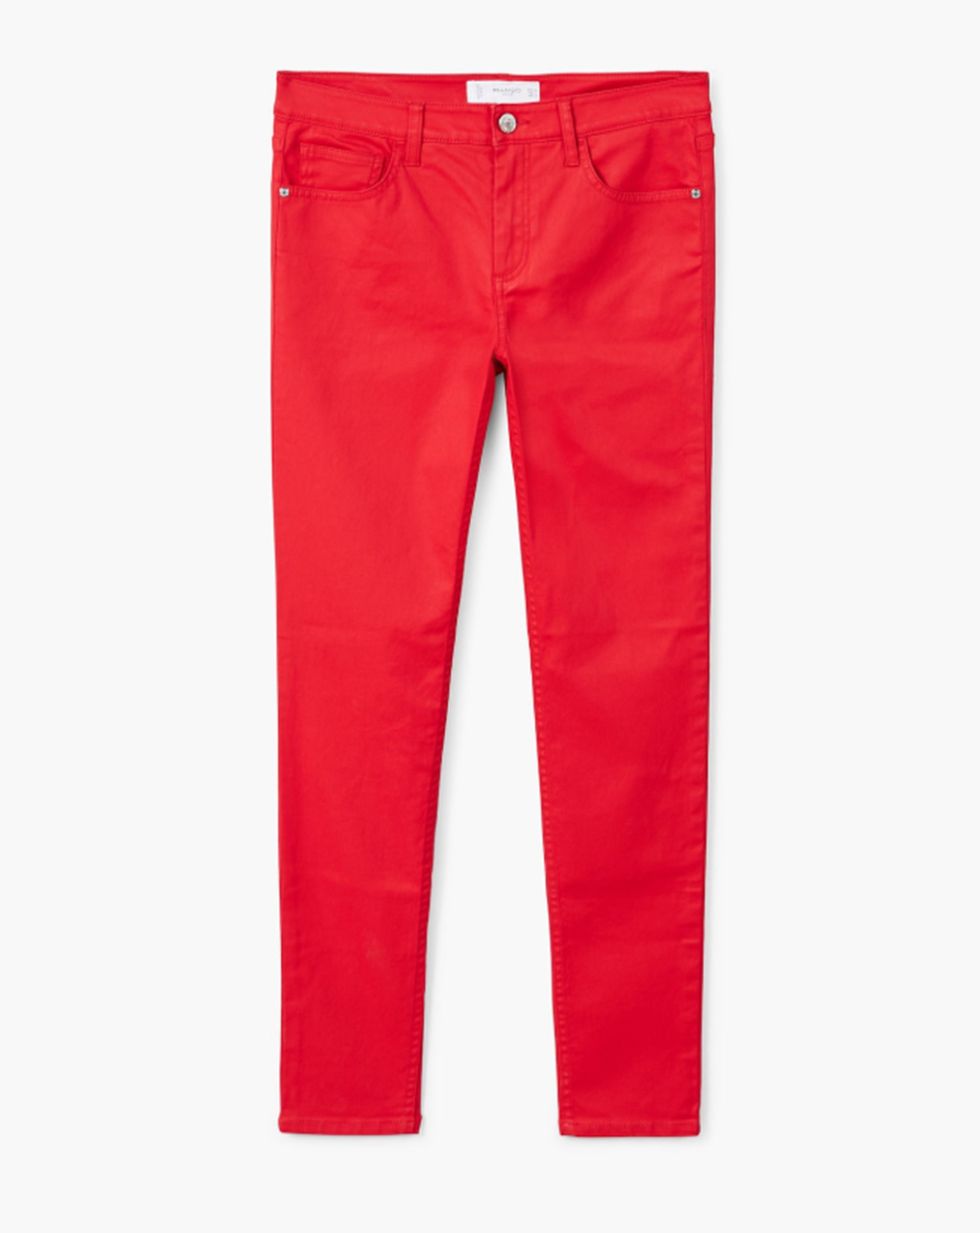 Clothing, Red, Jeans, Pocket, Trousers, Denim, Active pants, Textile, Sportswear, 